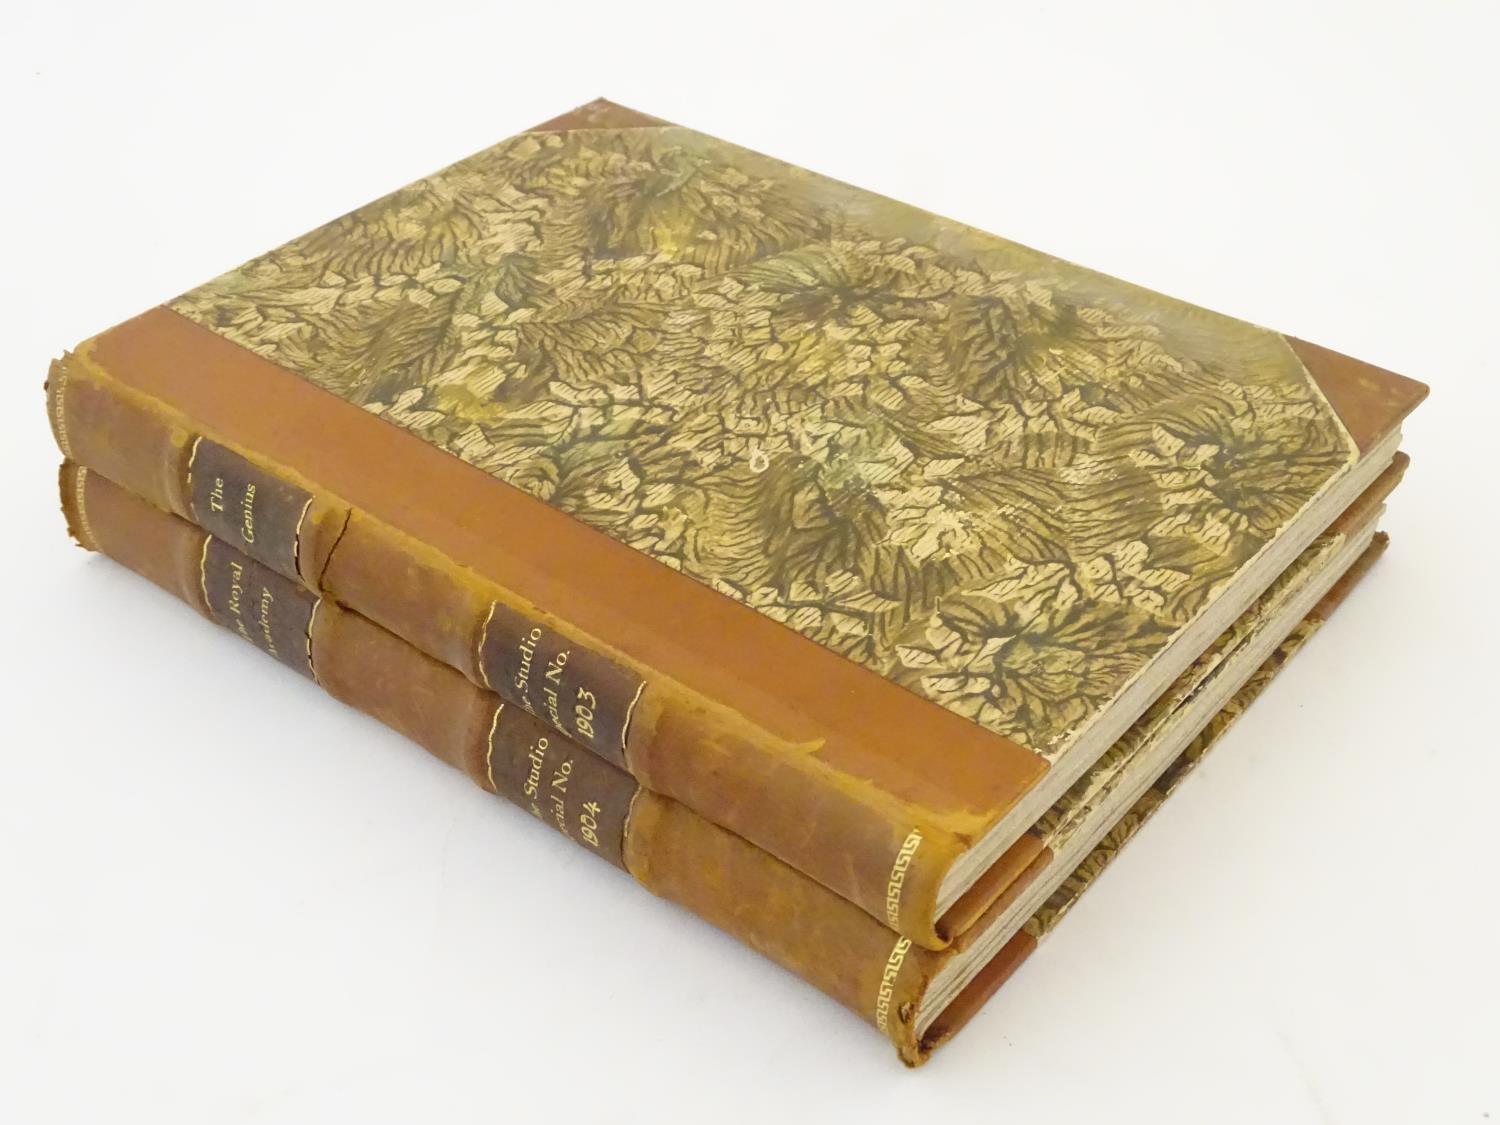 Books: The Royal Academy, From Reynolds to Millais, The Studio Special No. 1904, ed. Charles